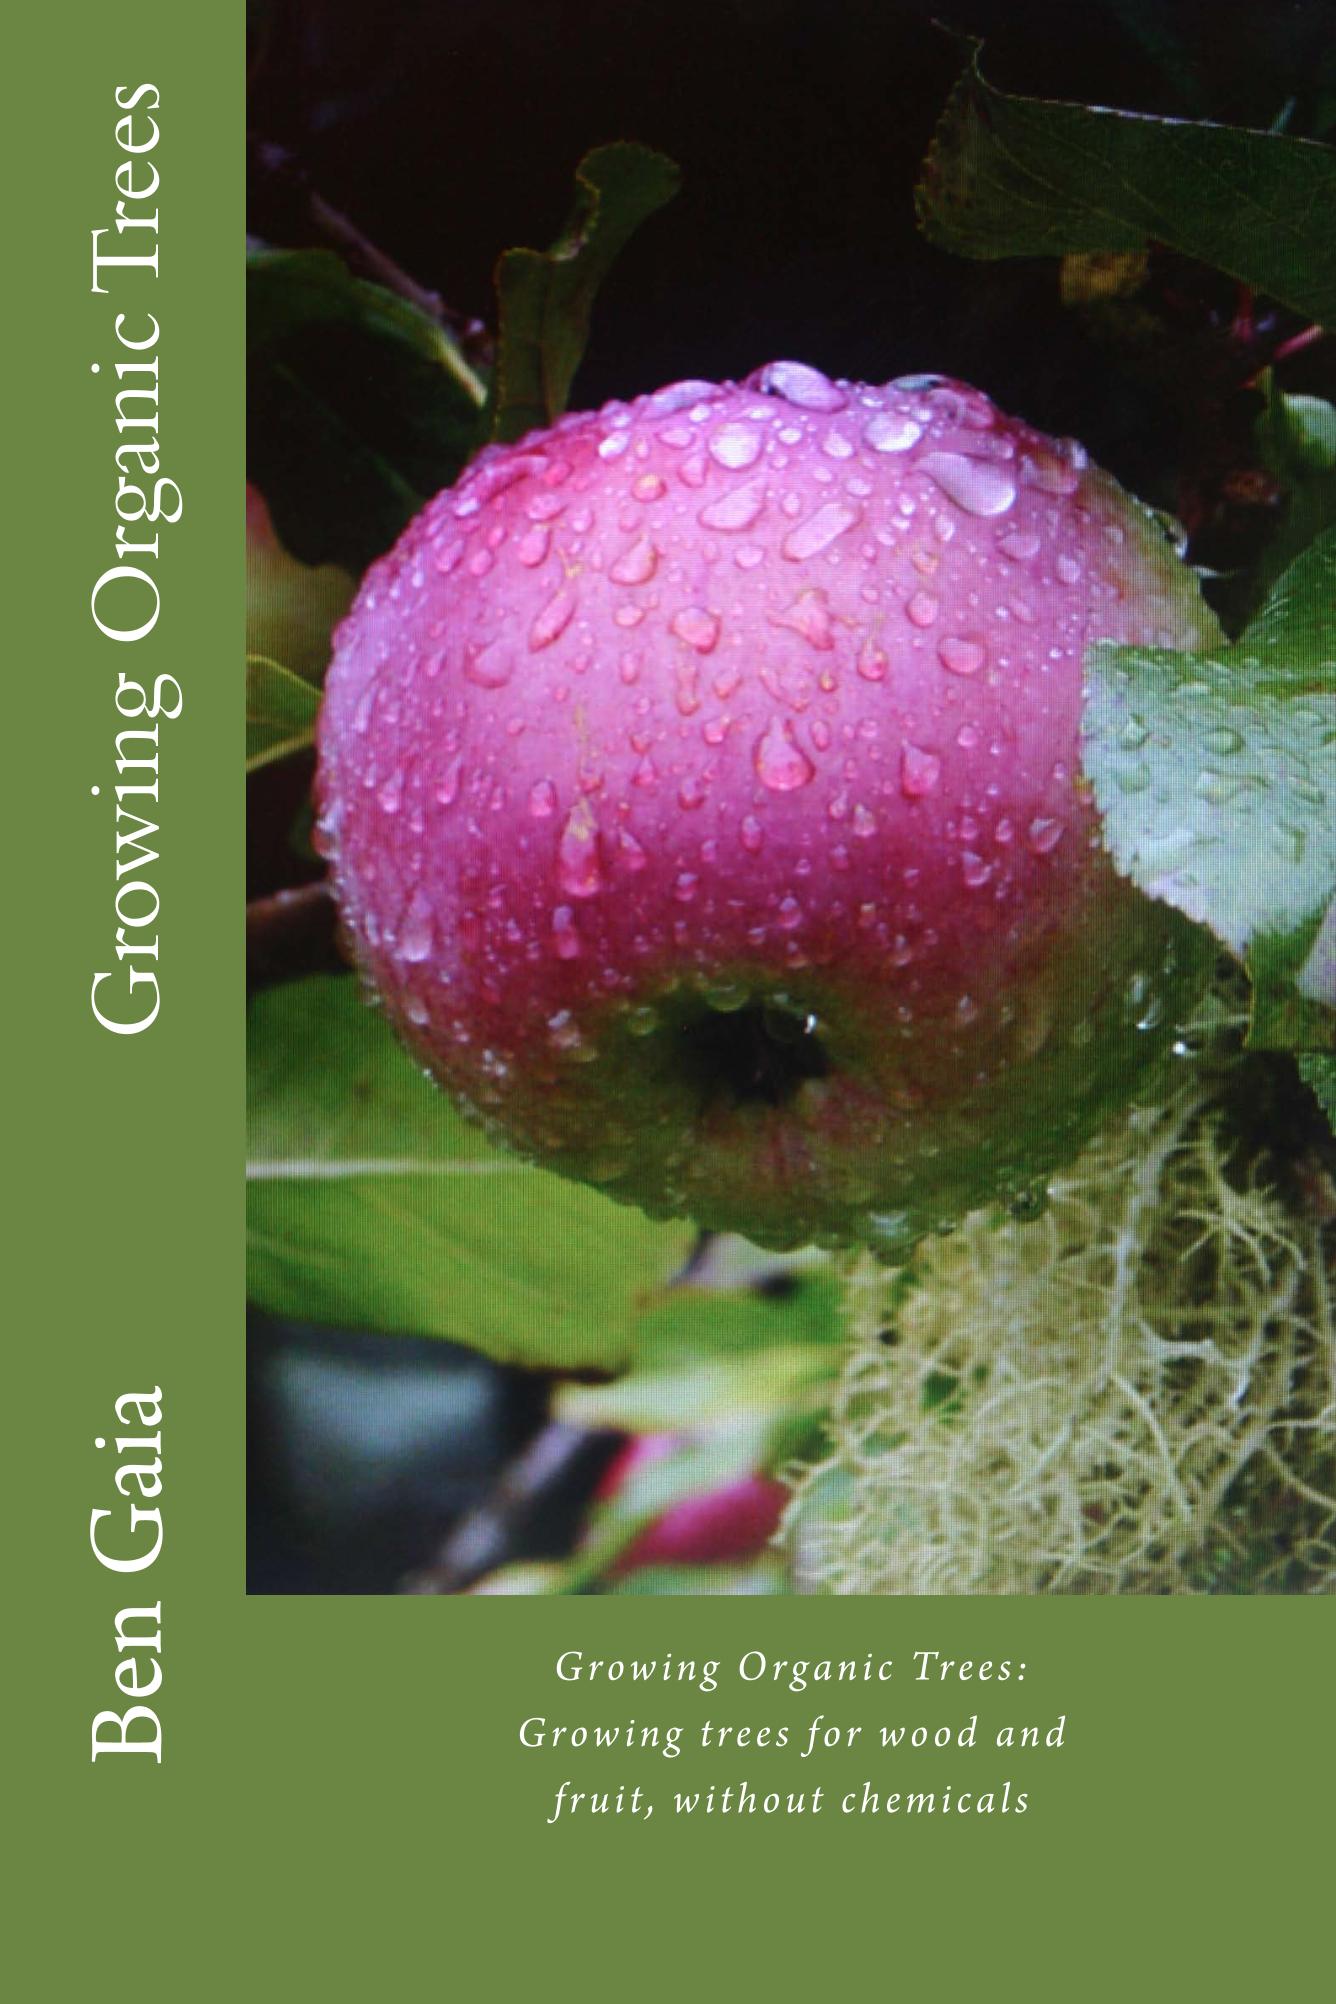 cover of Growing Organic Trees, a luscious organic sturmer apple dripping with raindrops